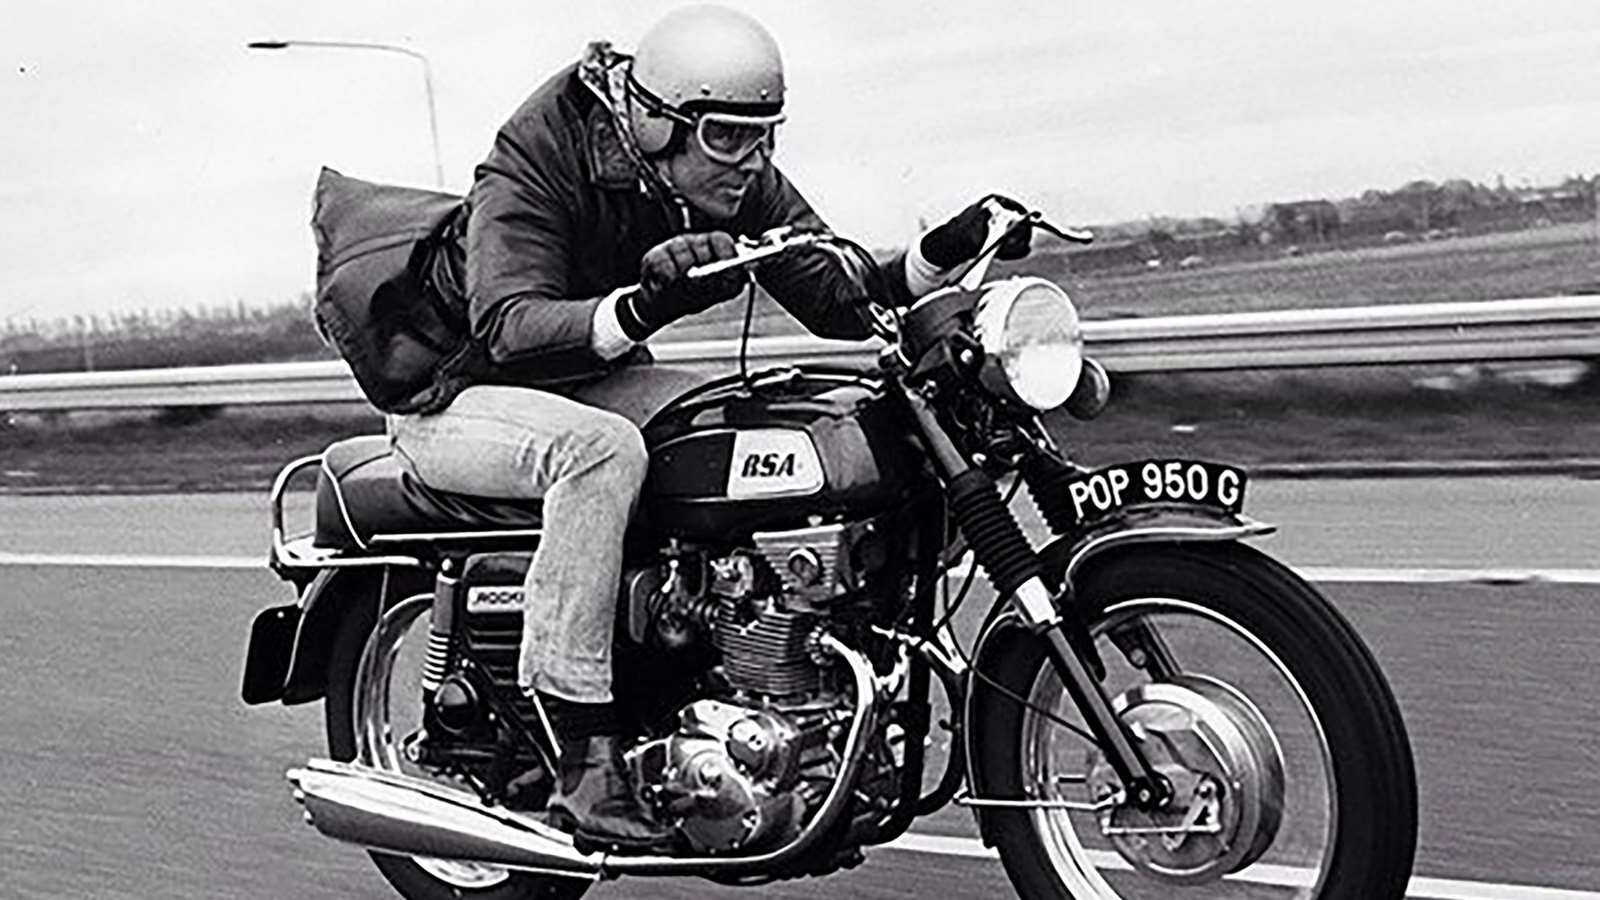 George Lazenby riding his BSA Rocket 3 Motorcycle